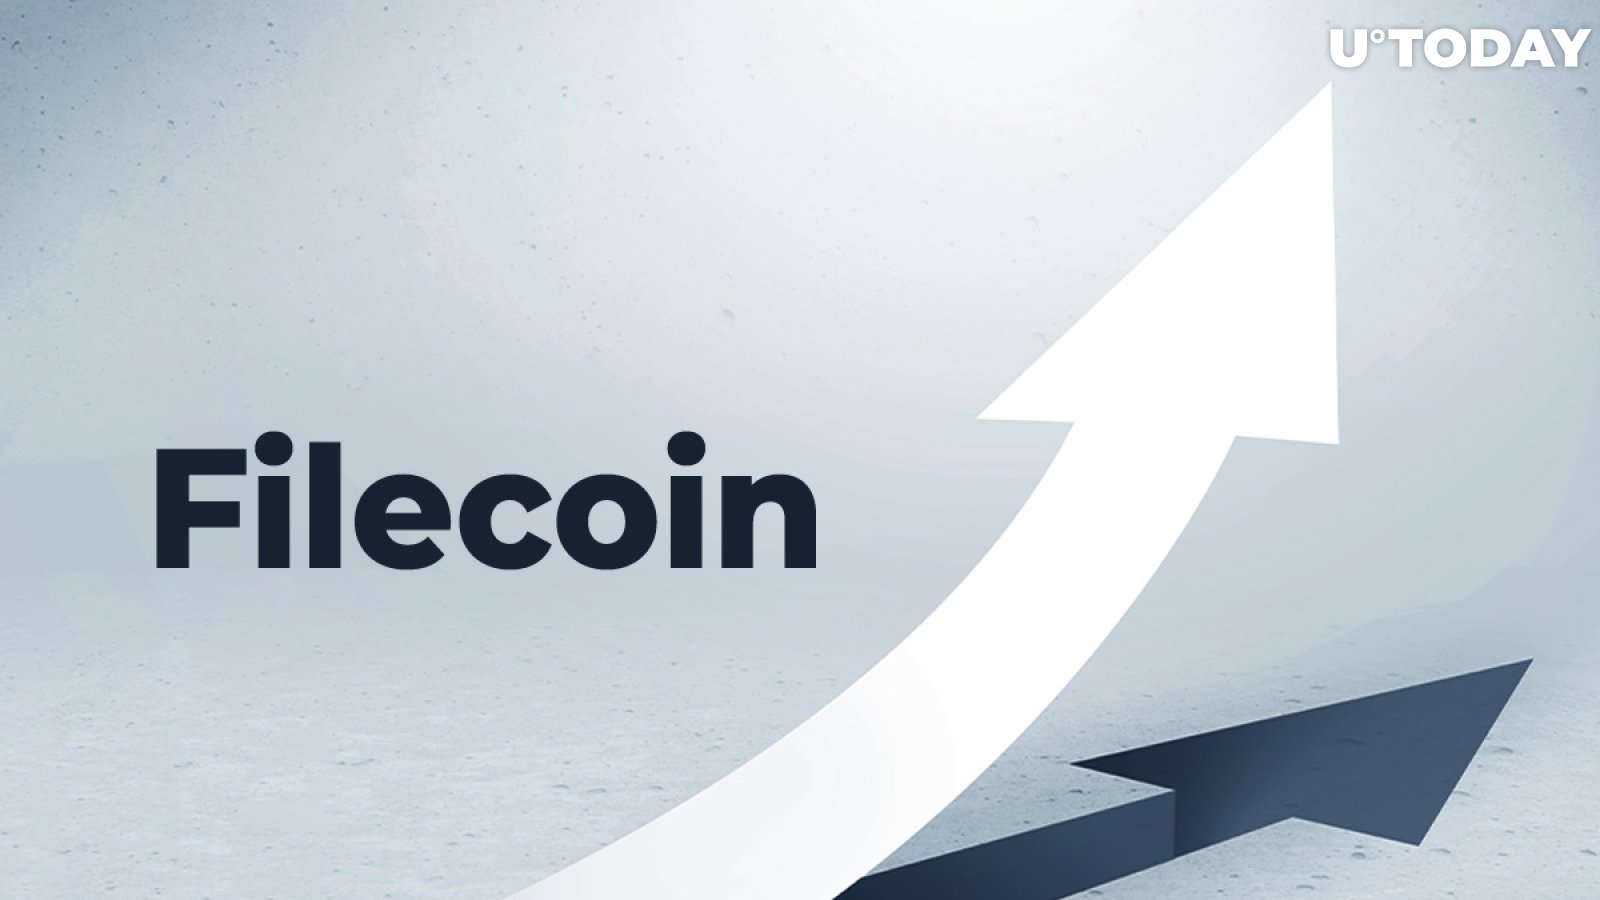 Filecoin Currently Valued at $323 Bln, Dwarfing Bitcoin's Market Cap